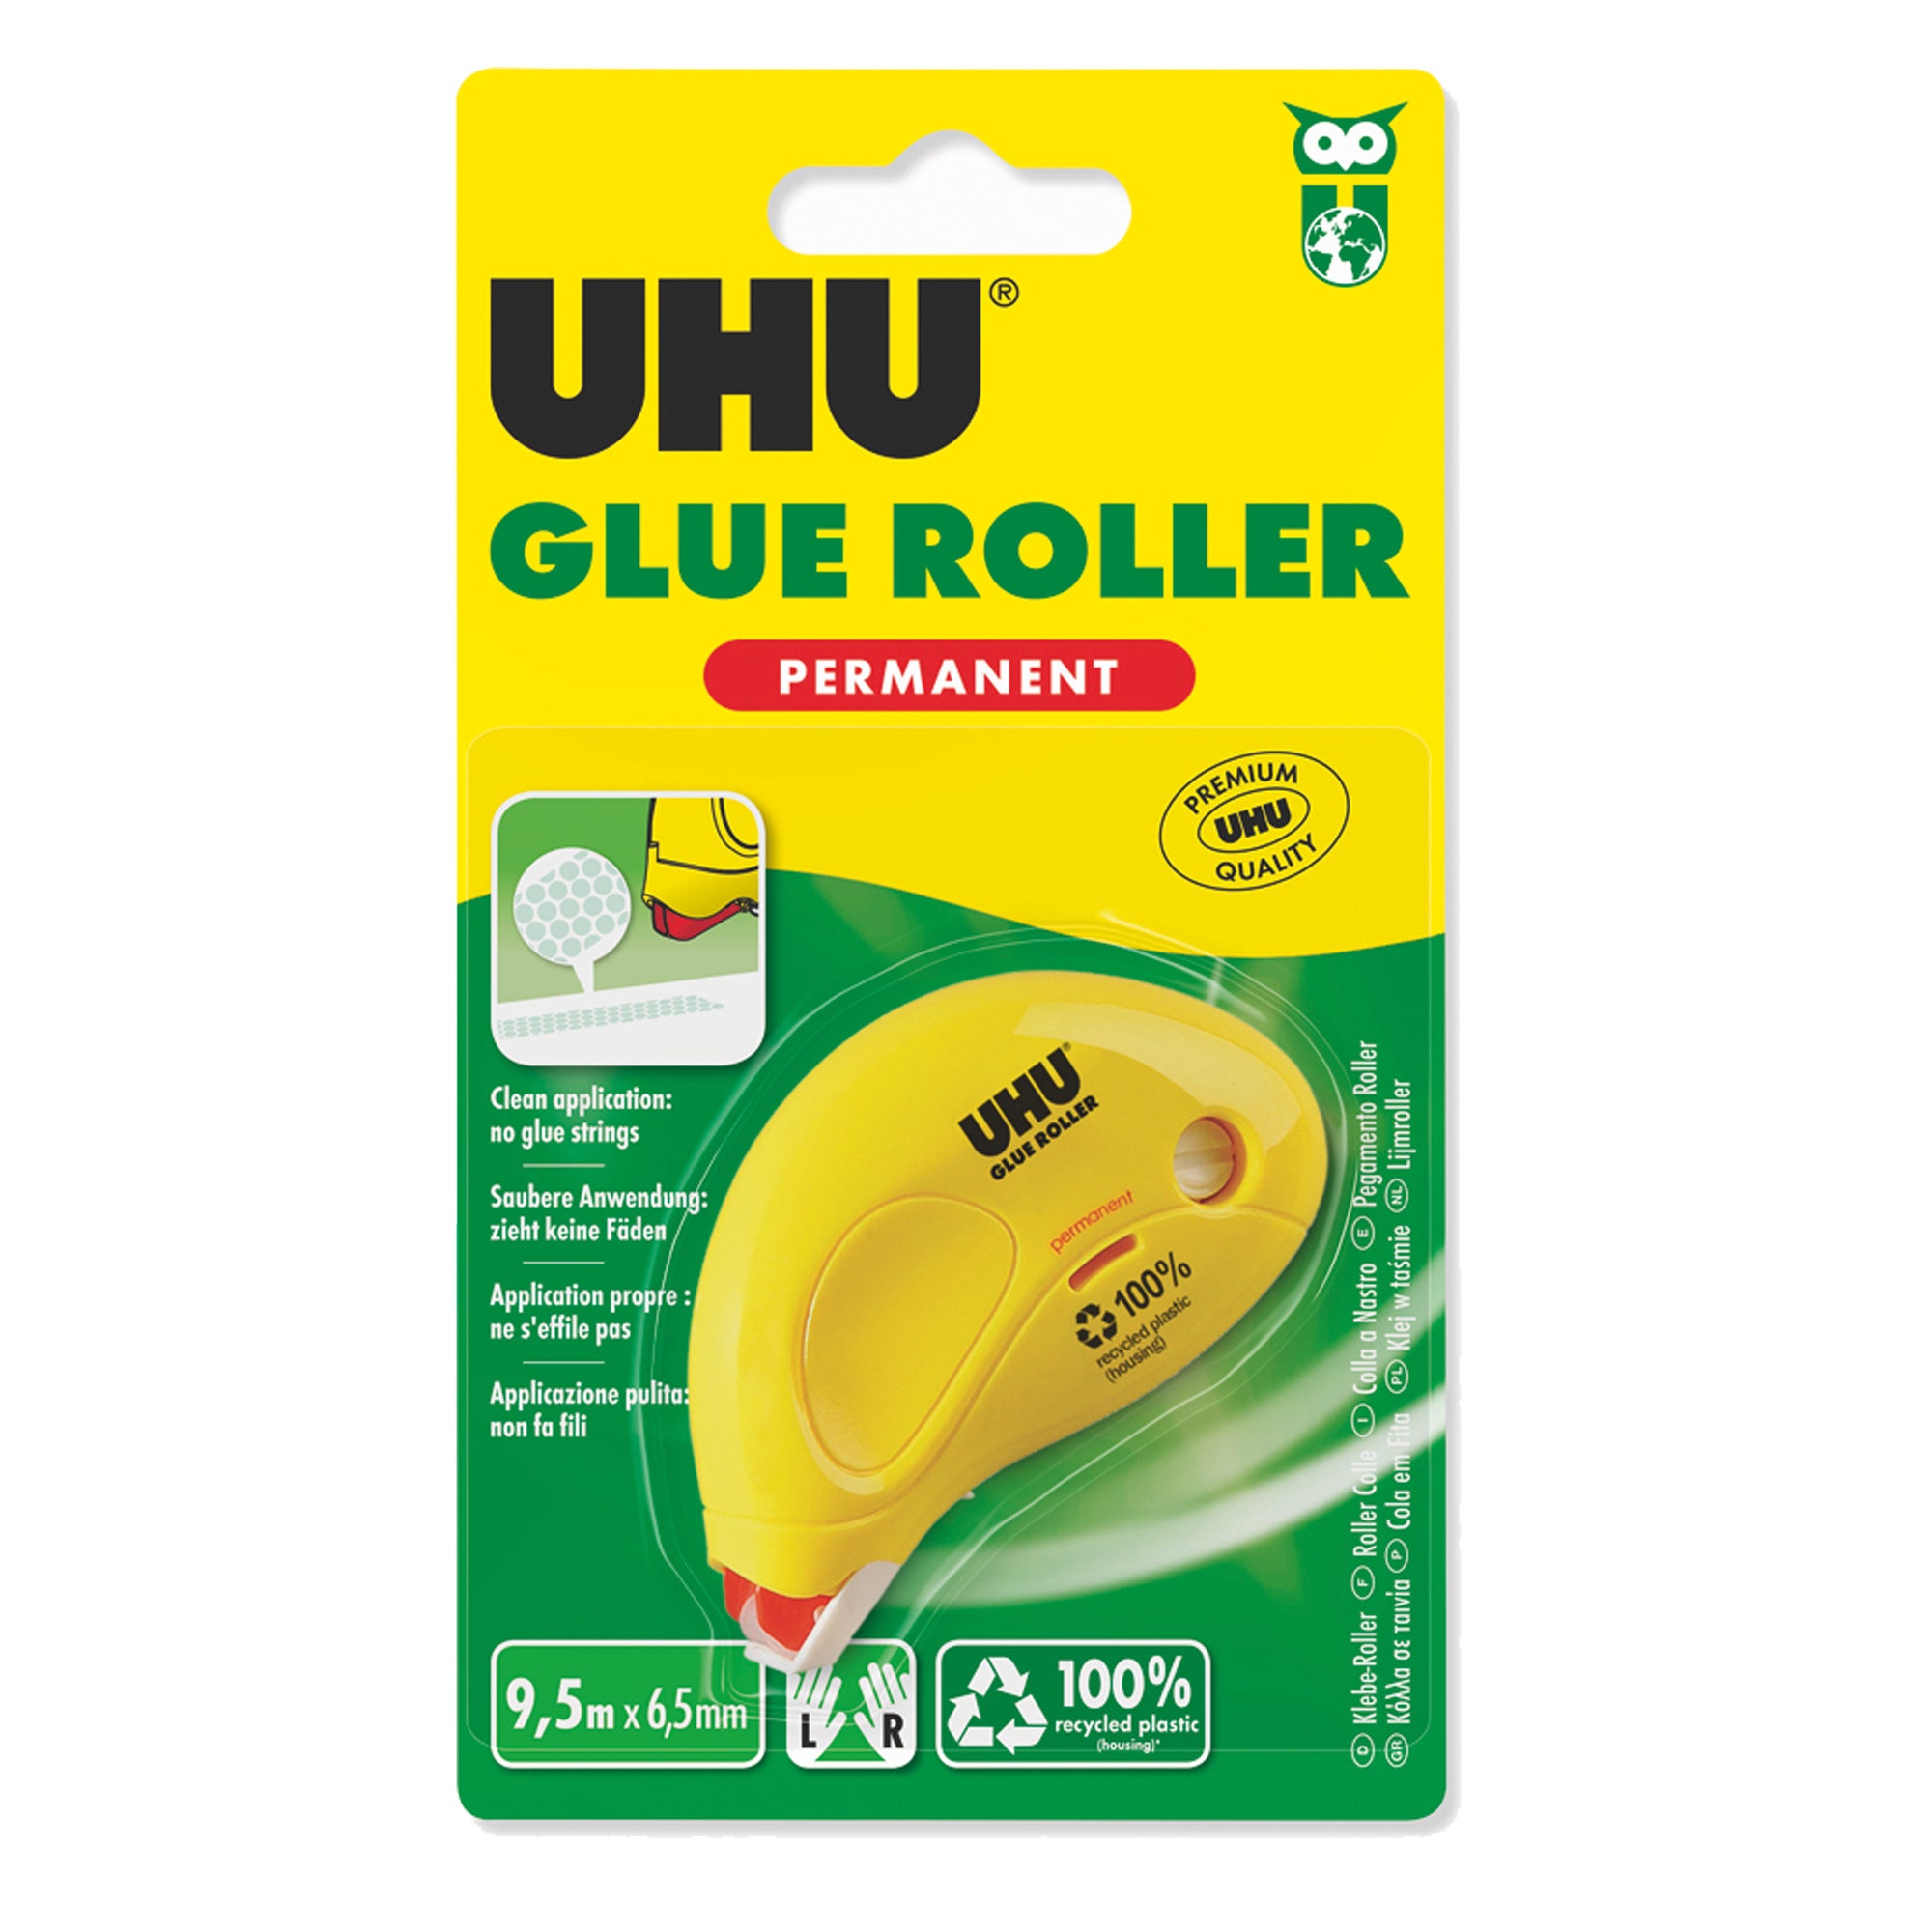 uhu-colla-nastro-dryclean-roller-6-5mmx8-5mt-permanente-blister